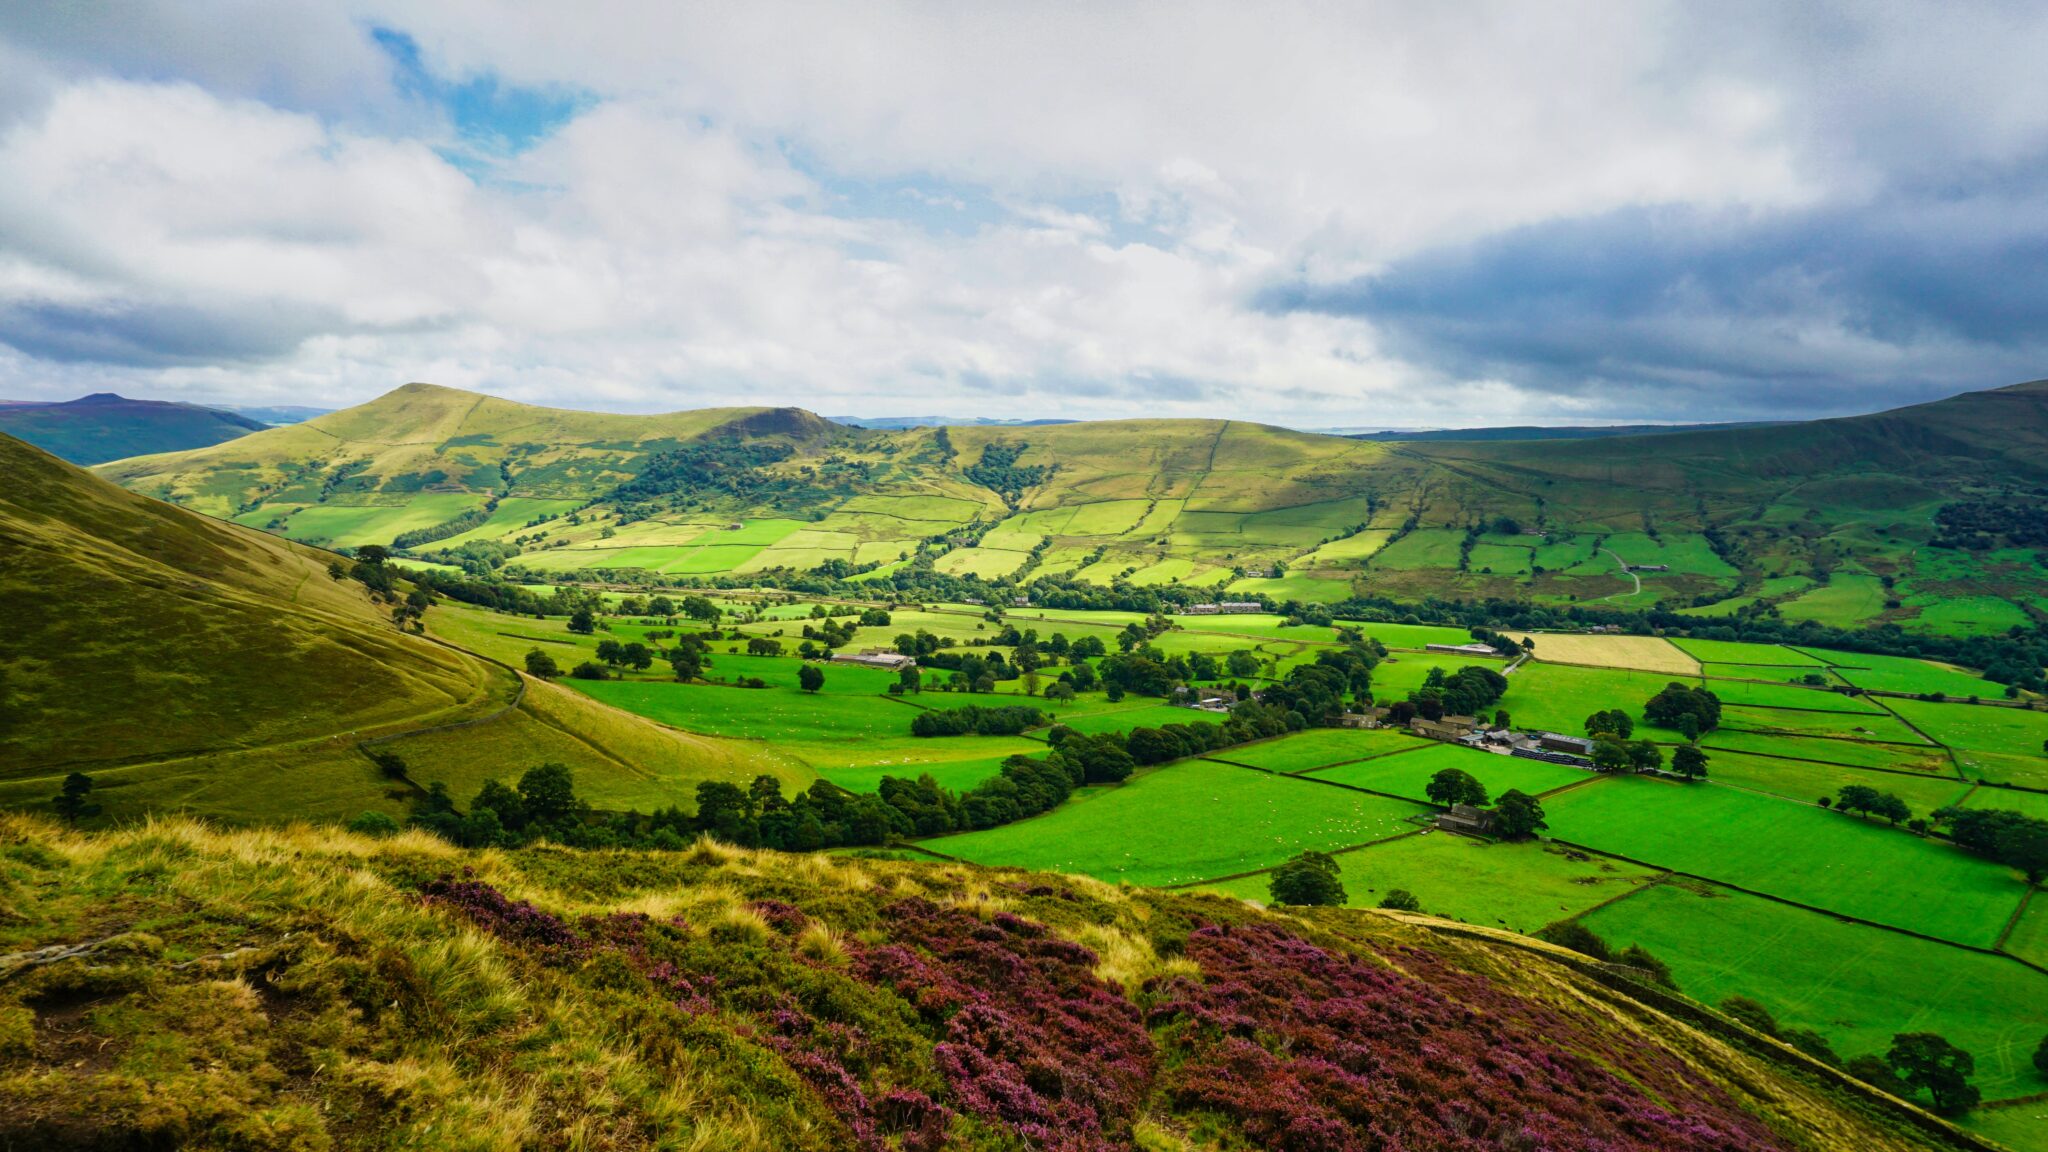 Reasons to holiday in the peak district